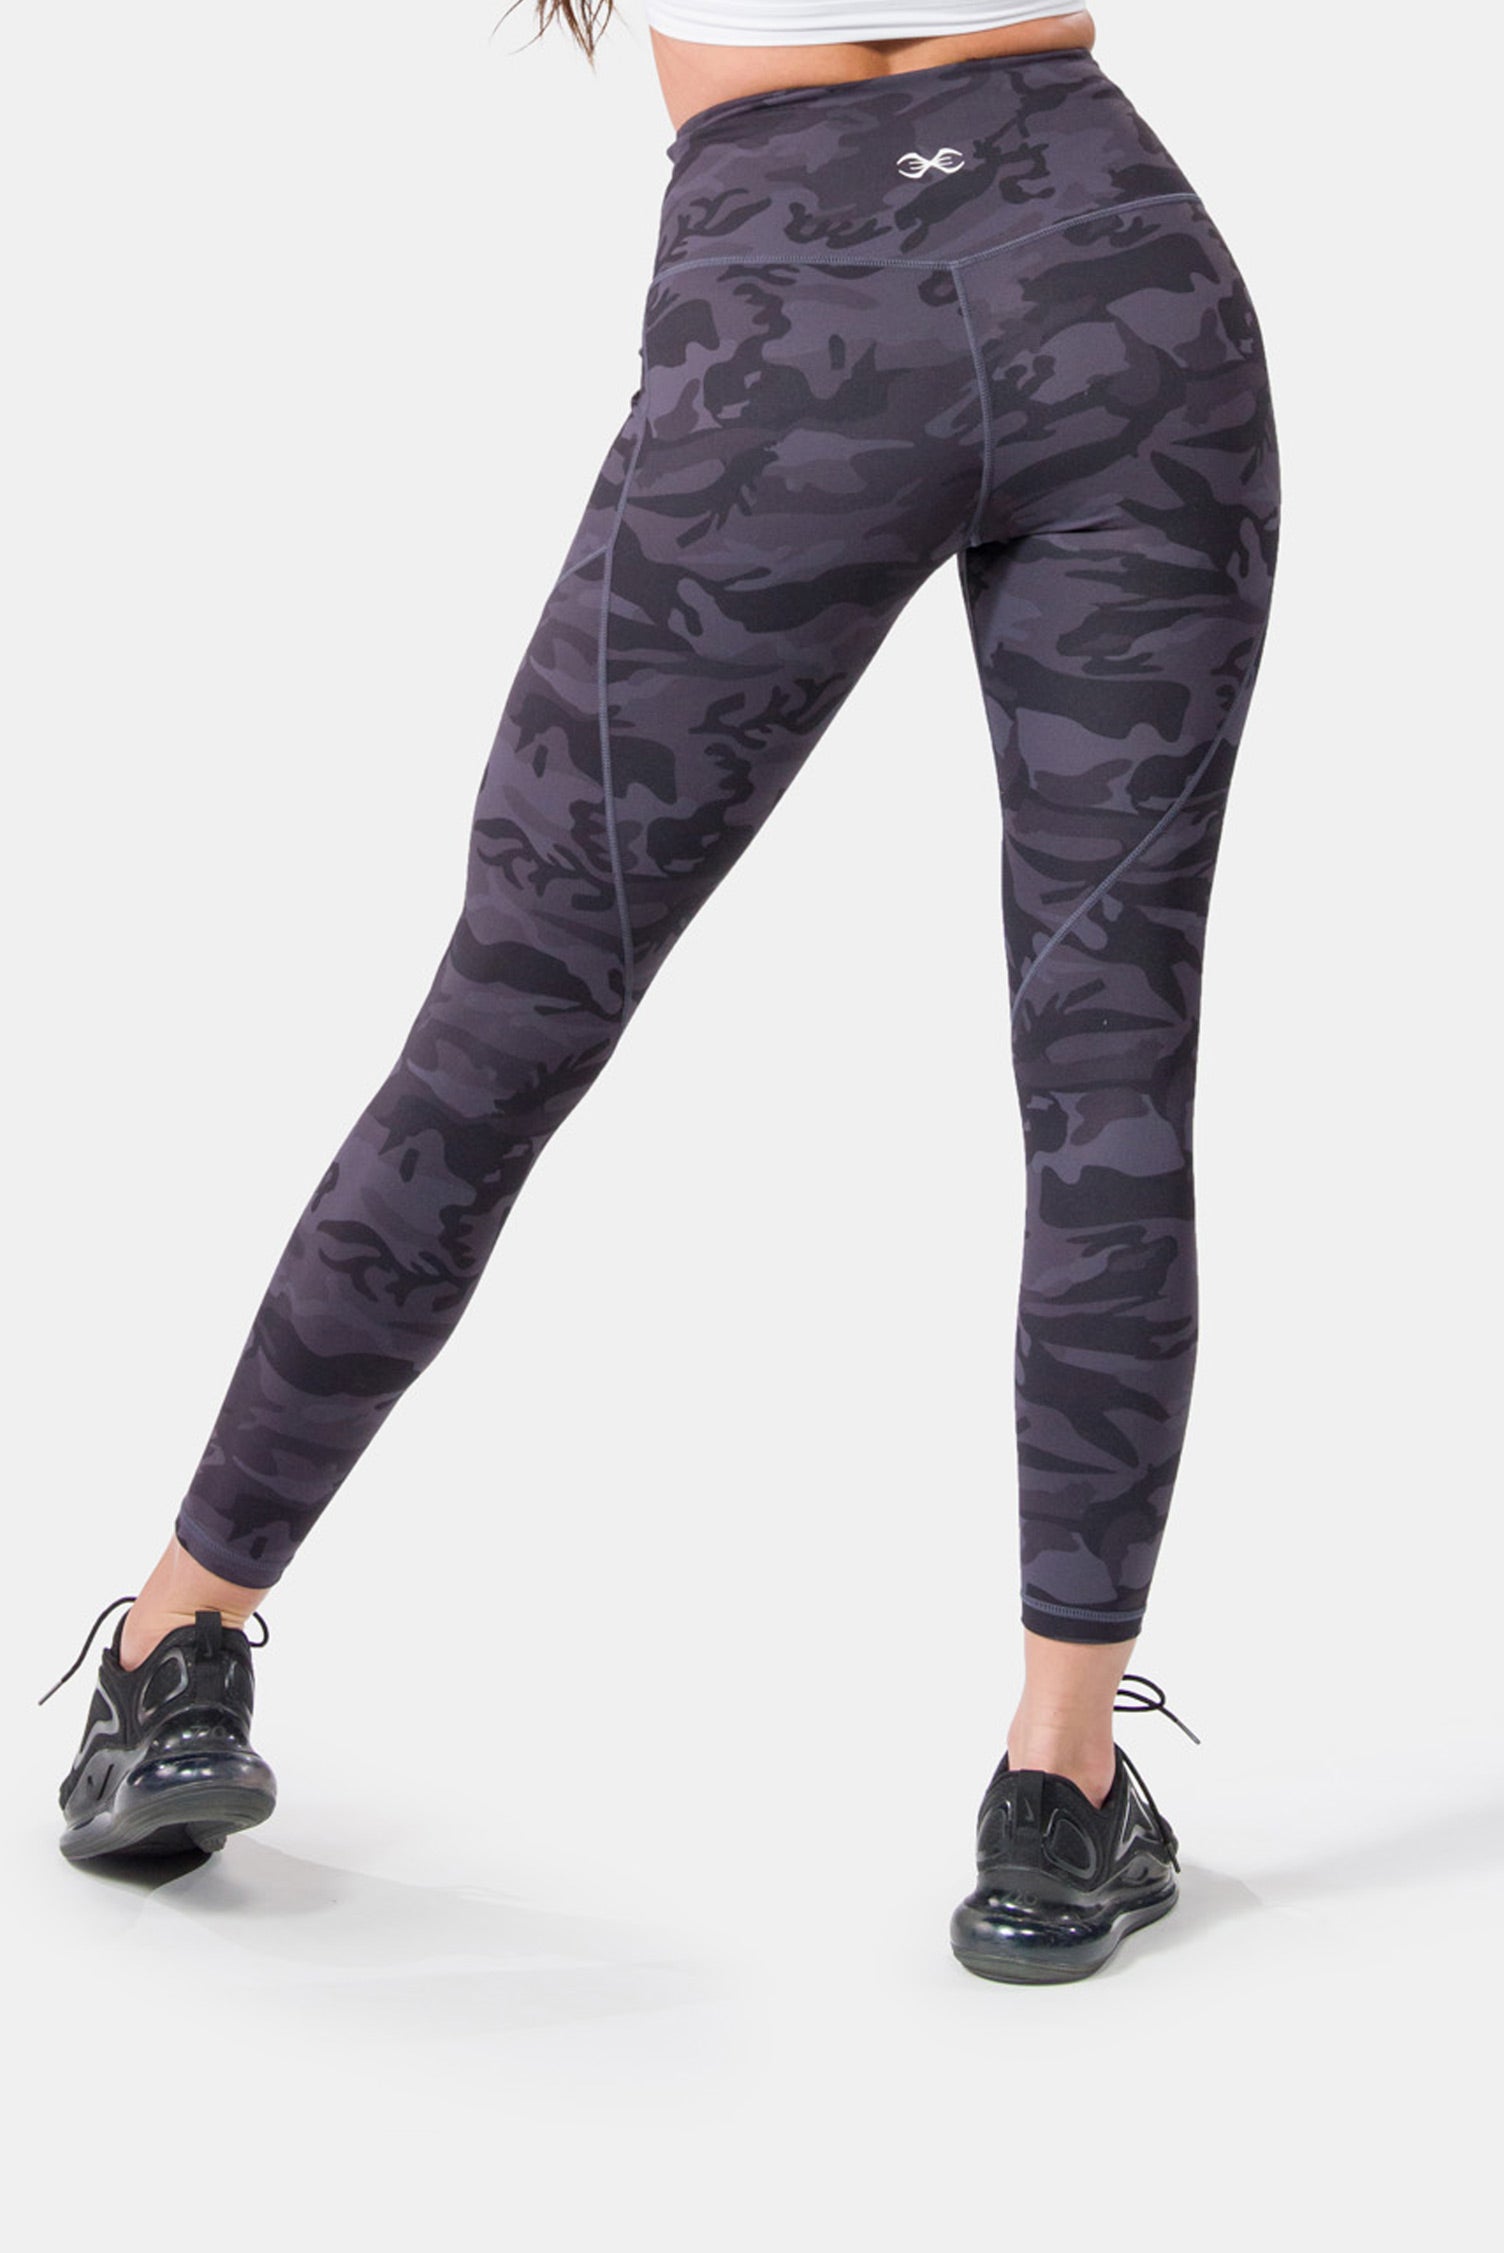 Fabletics Women's On-The-Go PowerHold High-Waisted Legging, Workout, Yoga,  Maximum Compression, Flattering, XXS, Charcoal Camo at  Women's  Clothing store